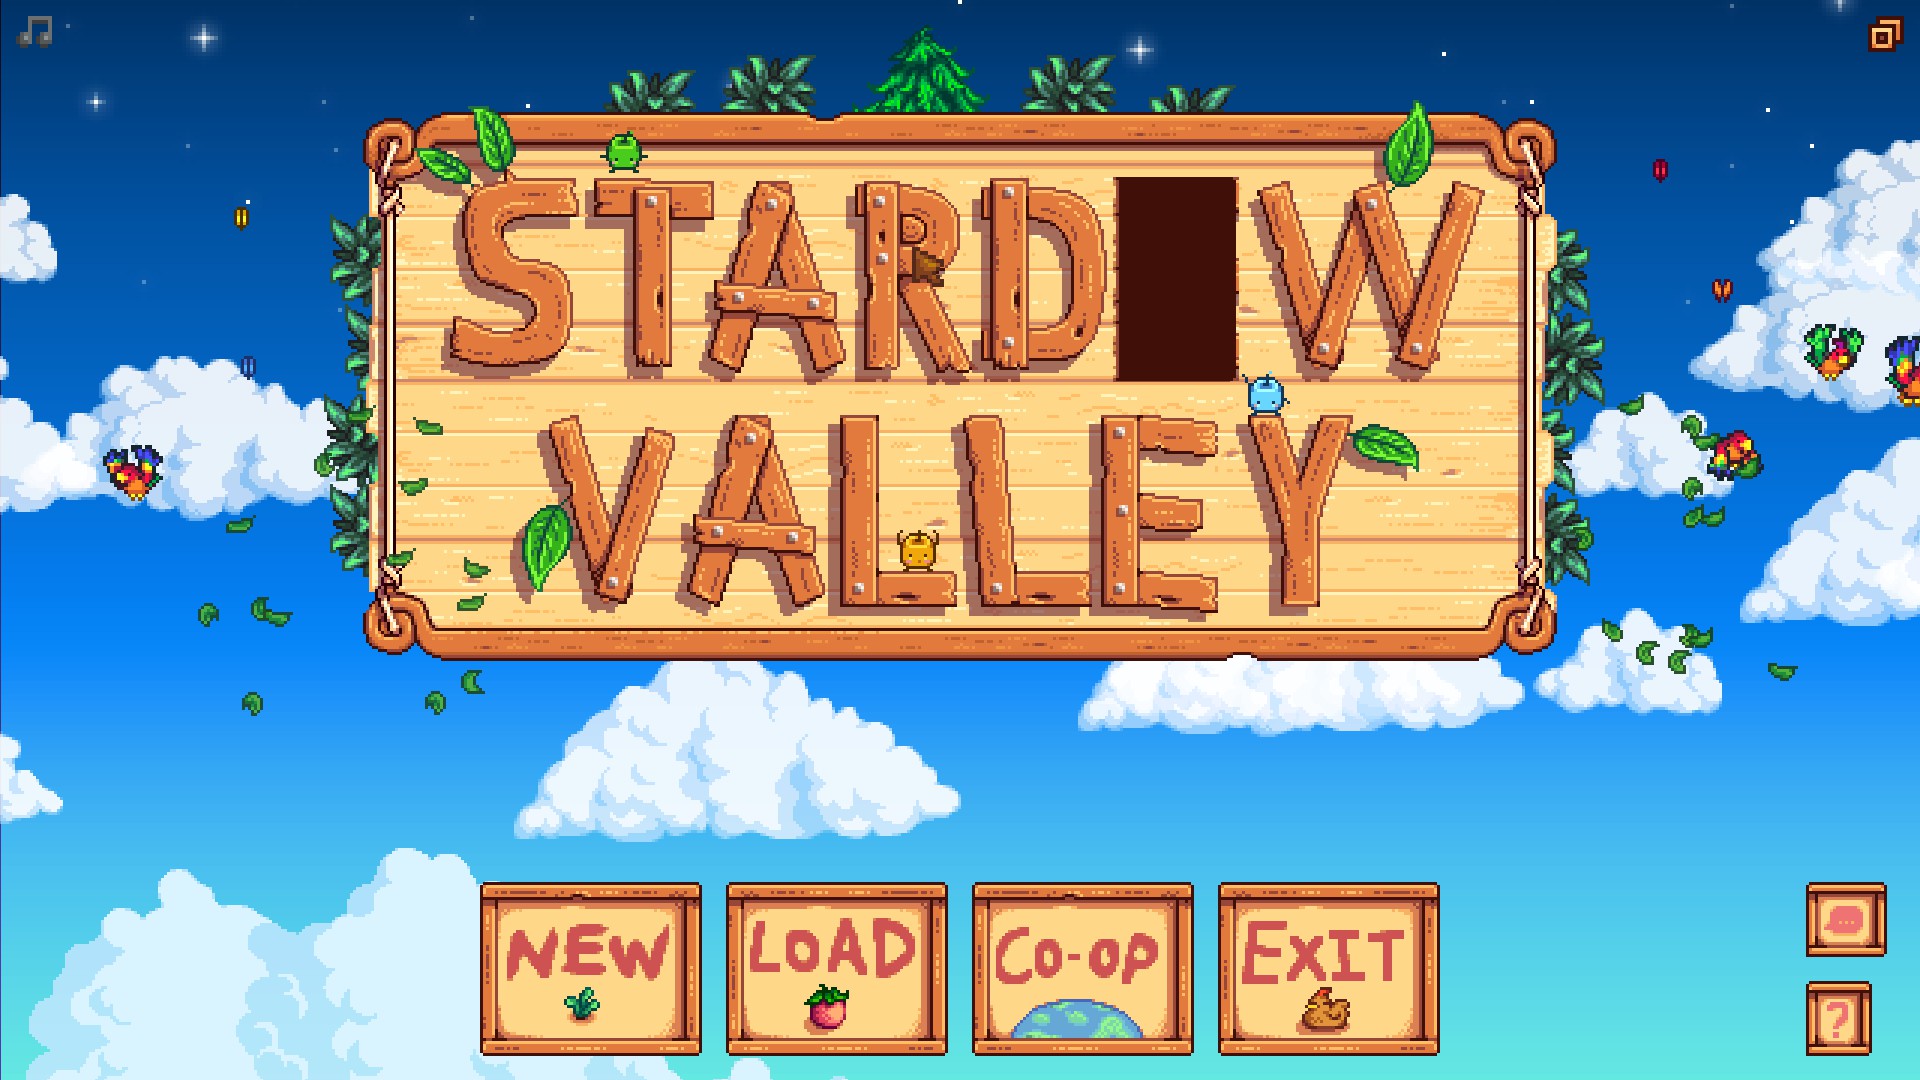 Stardew Valley - All 5 Menu Screen Easter Eggs - Forrest and birds